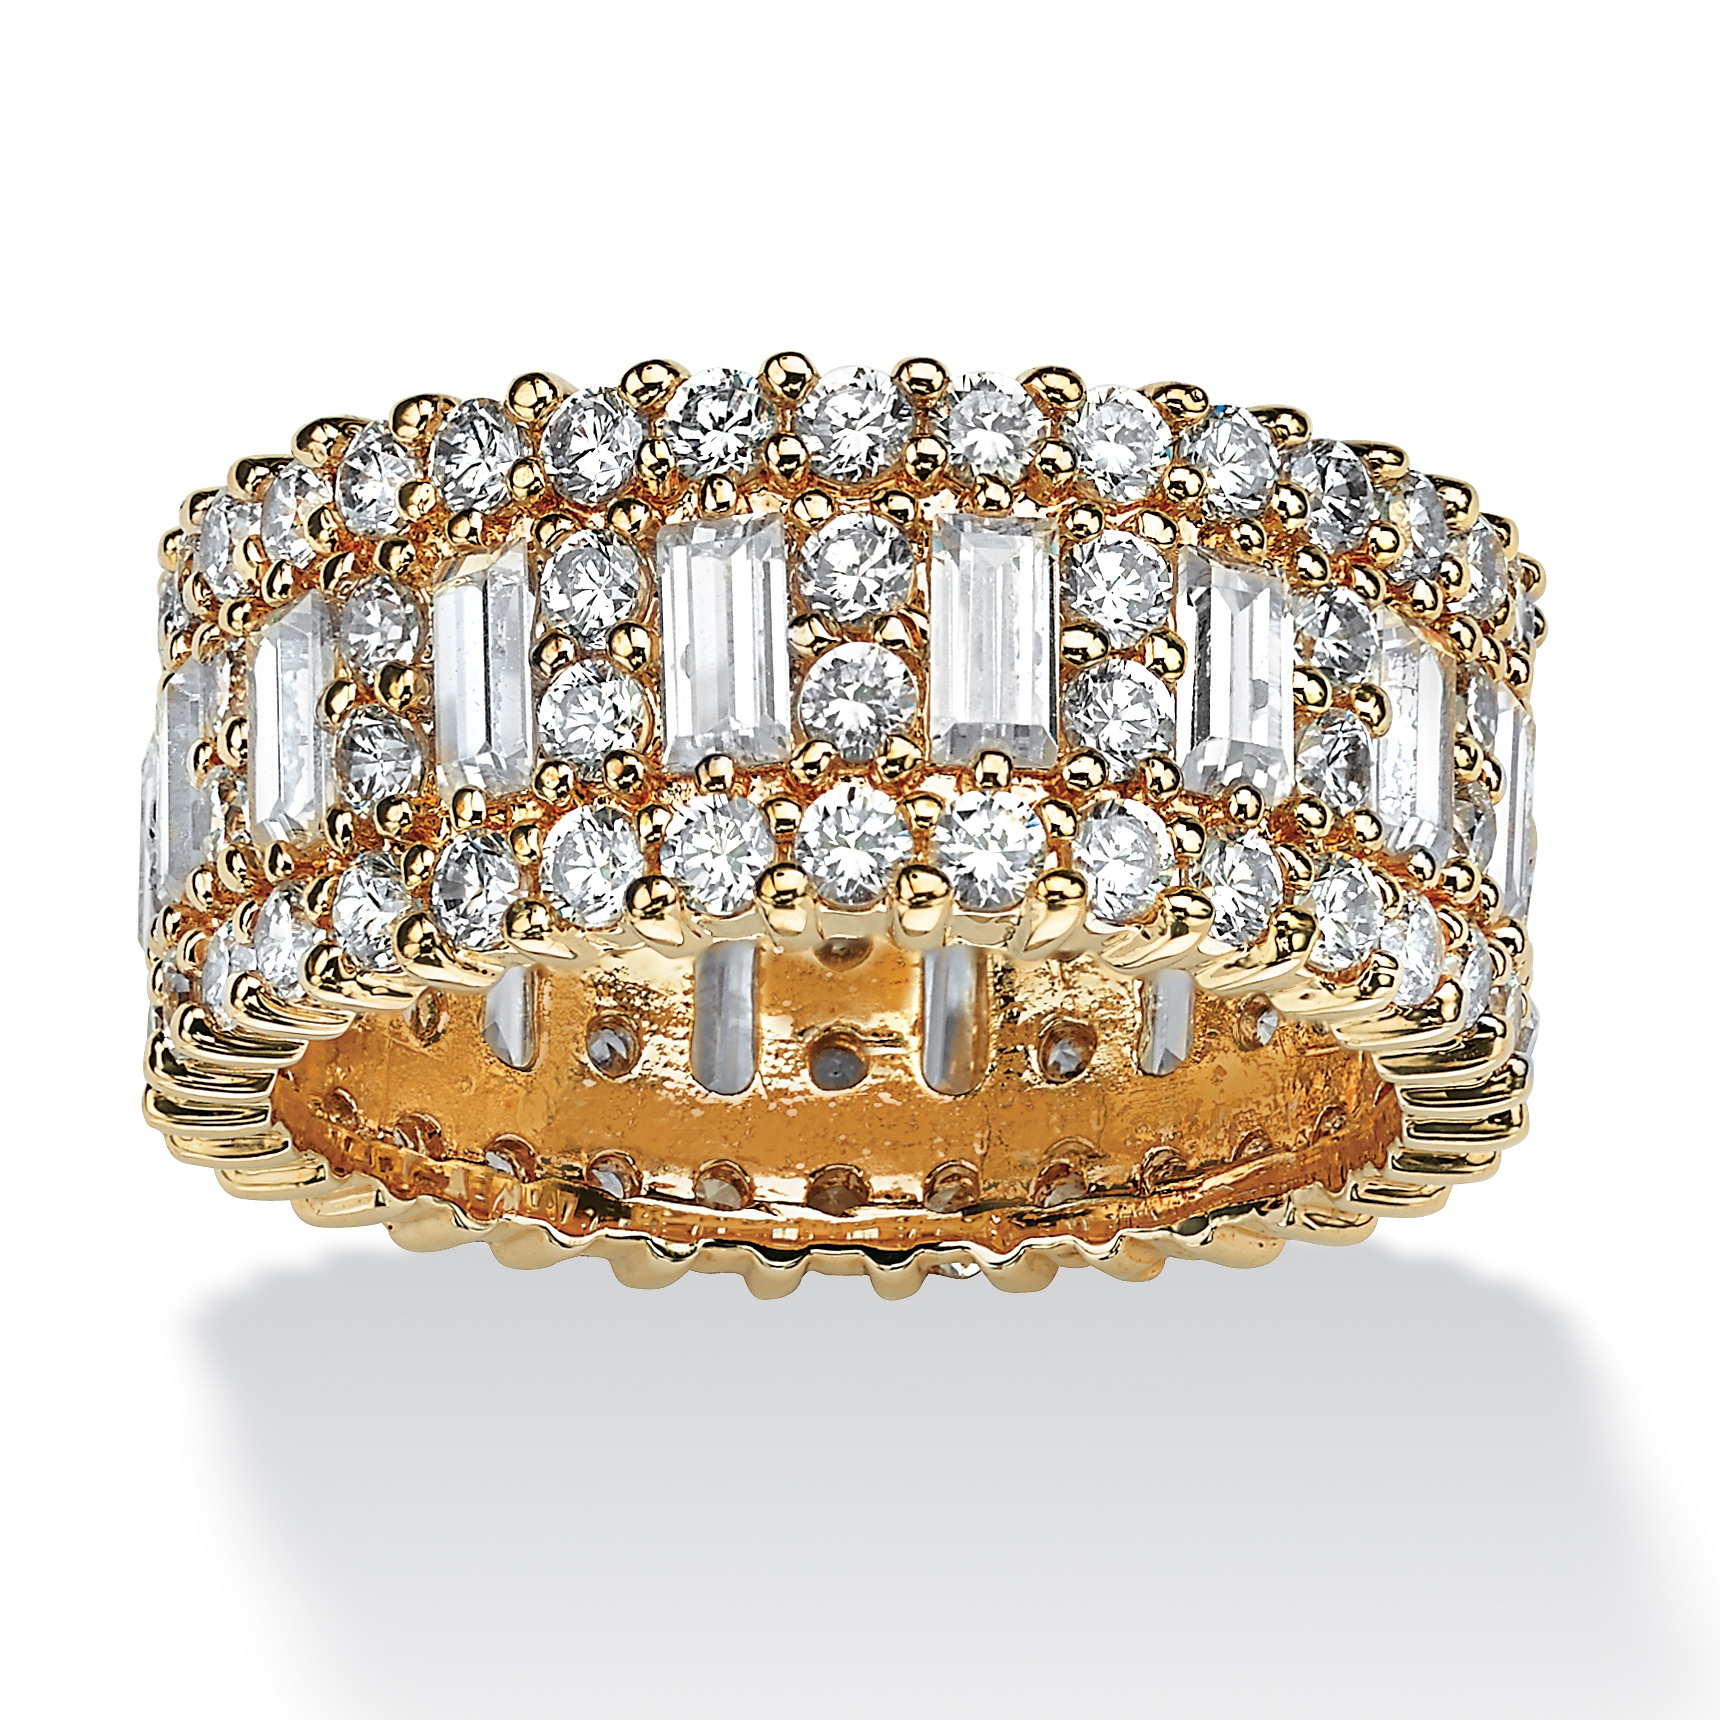 4.80 TCW Emerald-Cut Cubic Zirconia 14k Gold-Plated Eternity Ring at